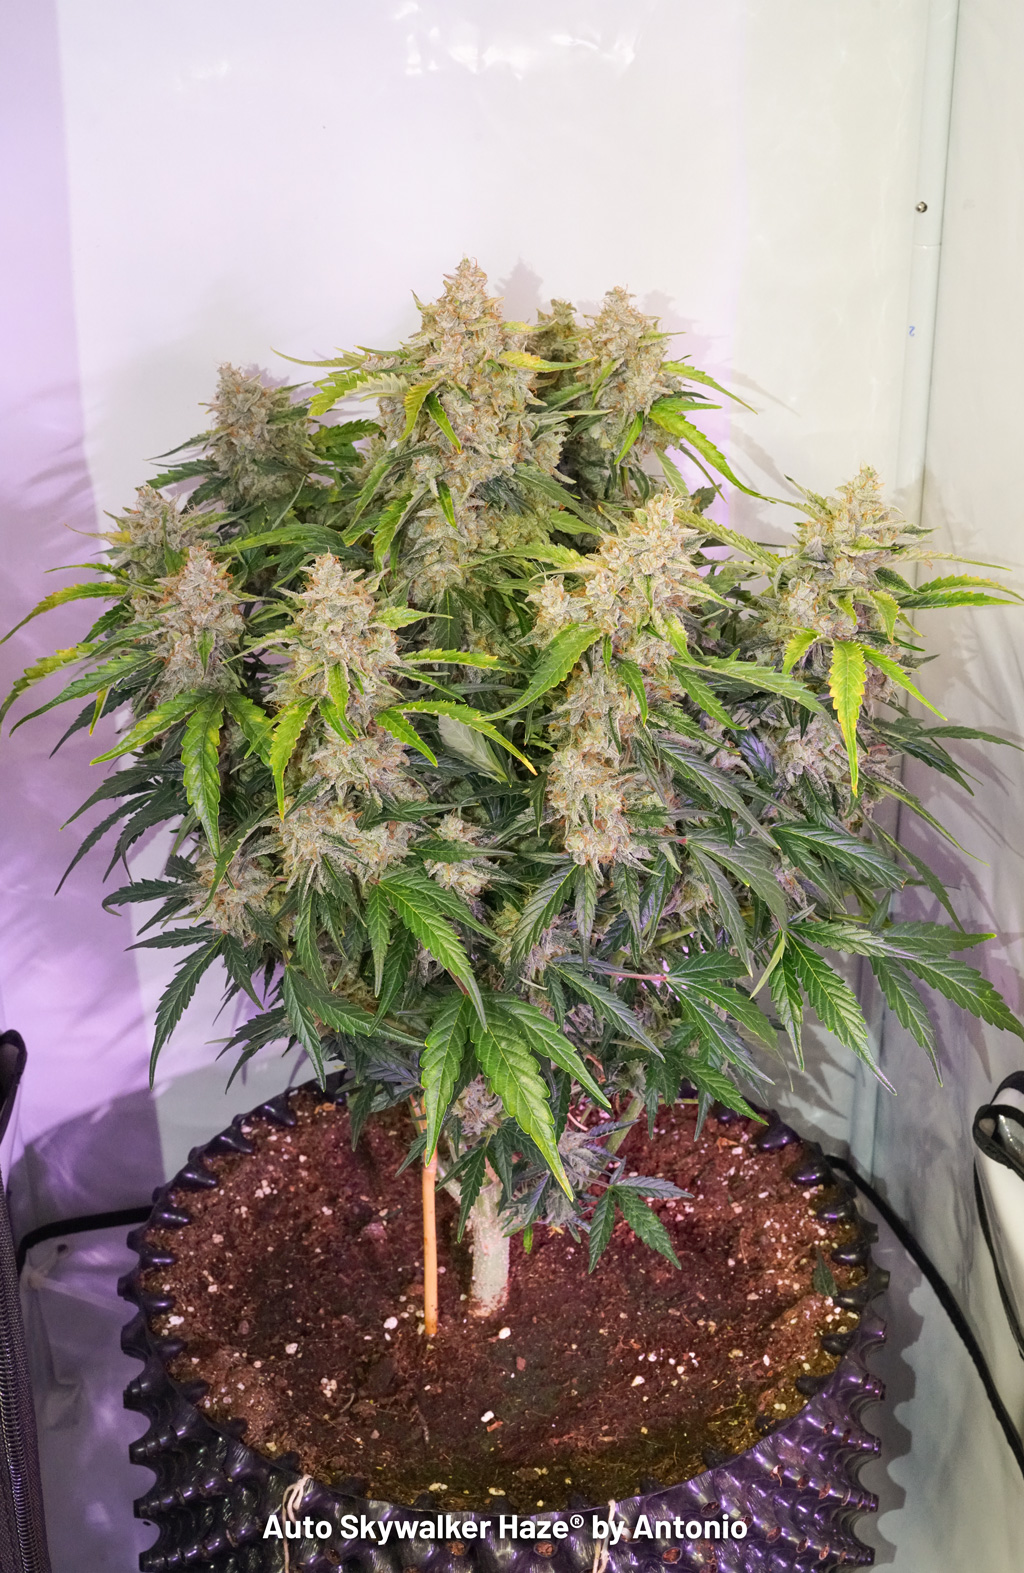 Auto Skywalker Haze 110g yield off a single plant within 13 weeks from seed to harvest.